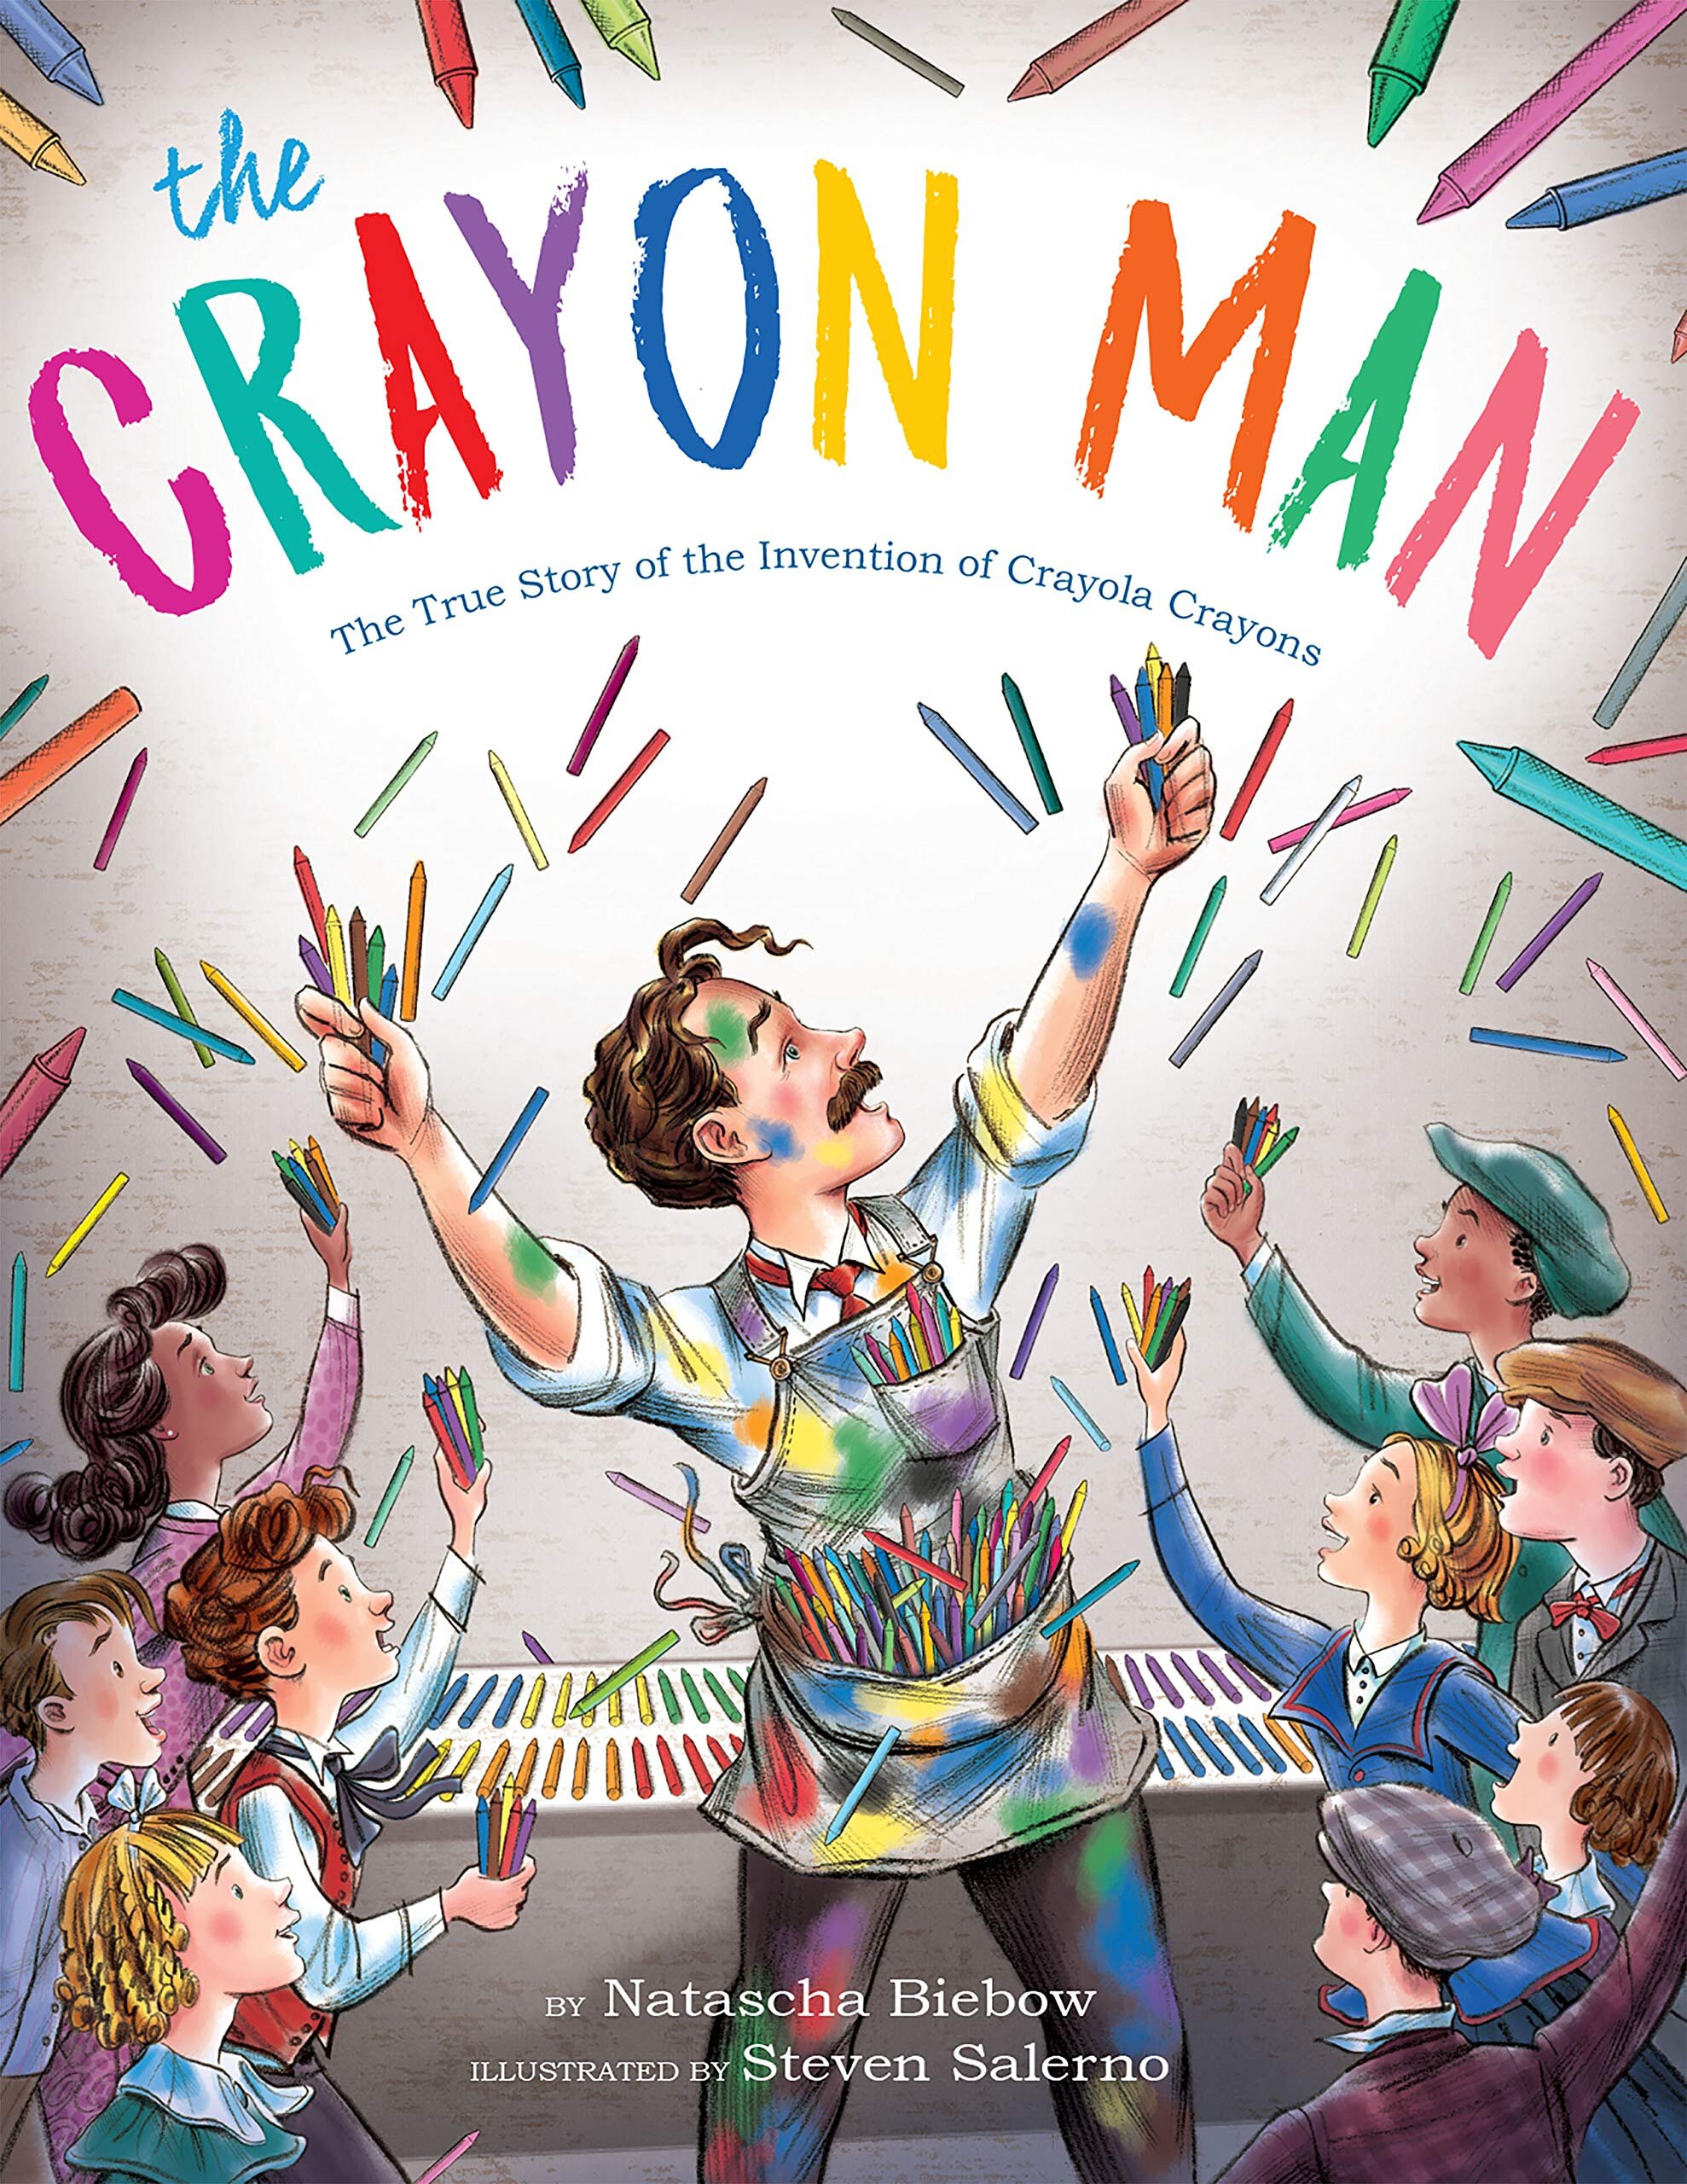 The Crayon Man: The True Story of the Invention of Crayola Crayons -Natascha Biebow